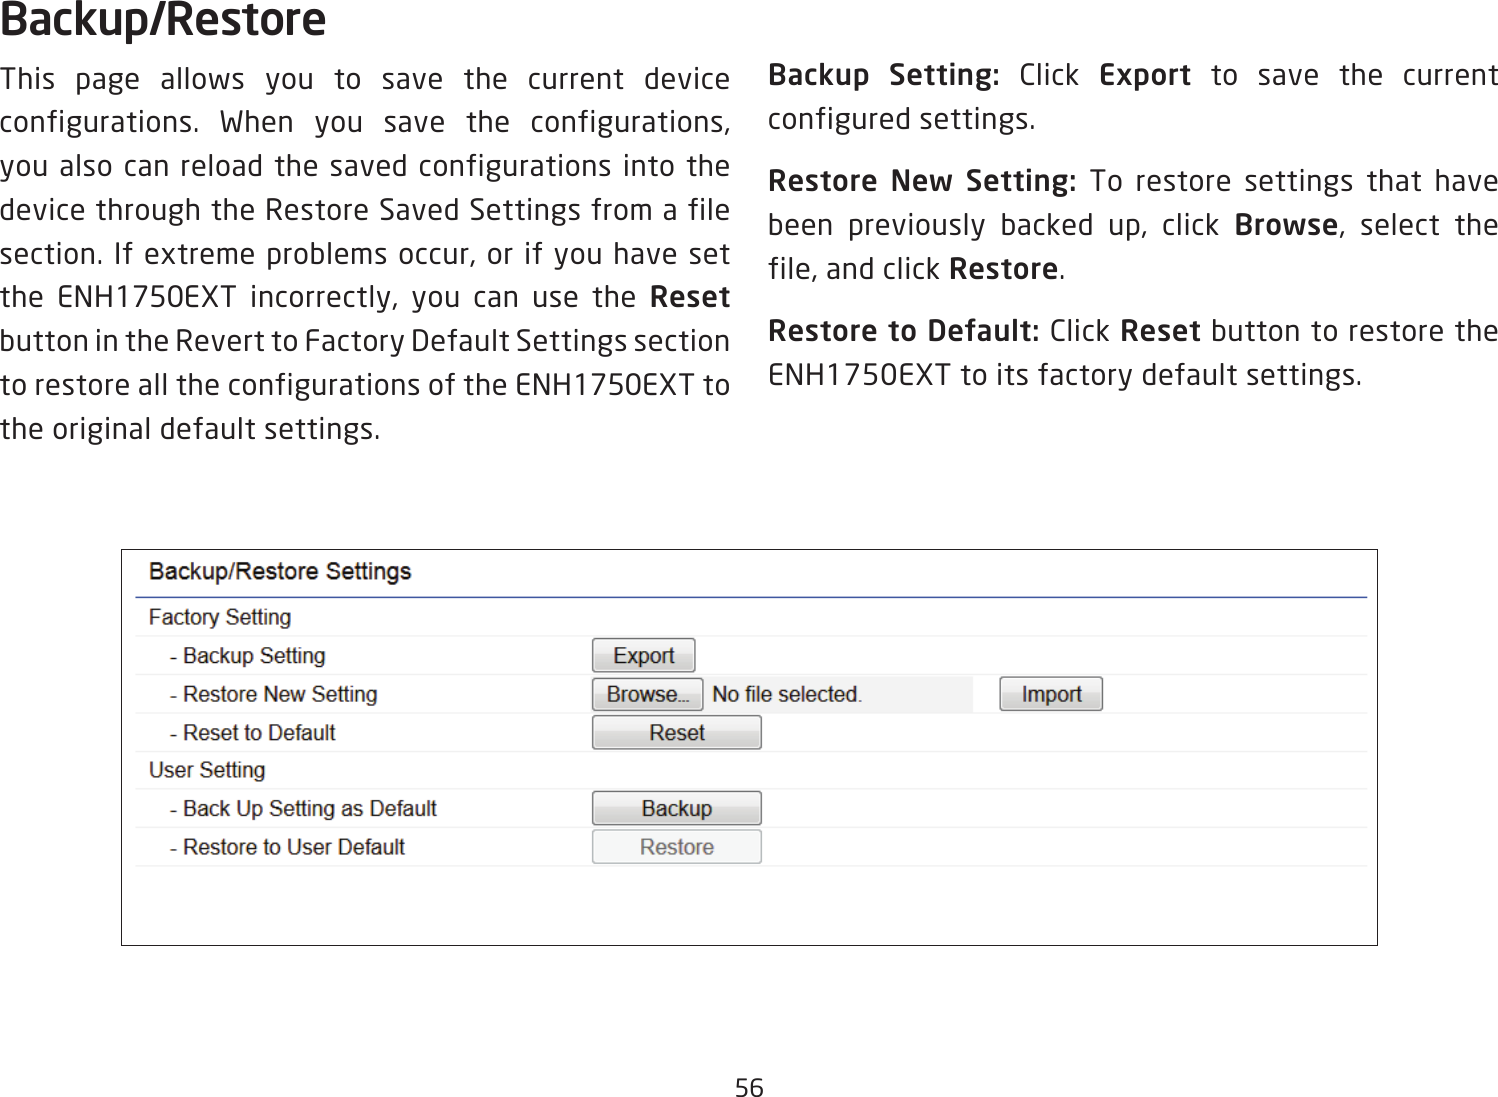 56Backup/RestoreThis page allows you to save the current device configurations. When you save the configurations, you also can reload the saved configurations into the device through the Restore Saved Settings from a file section. If extreme problems occur, or if you have set the ENH1750EXT incorrectly, you can use the Reset button in the Revert to Factory Default Settings section to restore all the configurations of the ENH1750EXT to the original default settings.Backup Setting: Click Export to save the current configured settings.Restore New Setting: To restore settings that have been previously backed up, click Browse, select the file, and click Restore.Restore to Default: Click Reset button to restore the ENH1750EXT to its factory default settings.